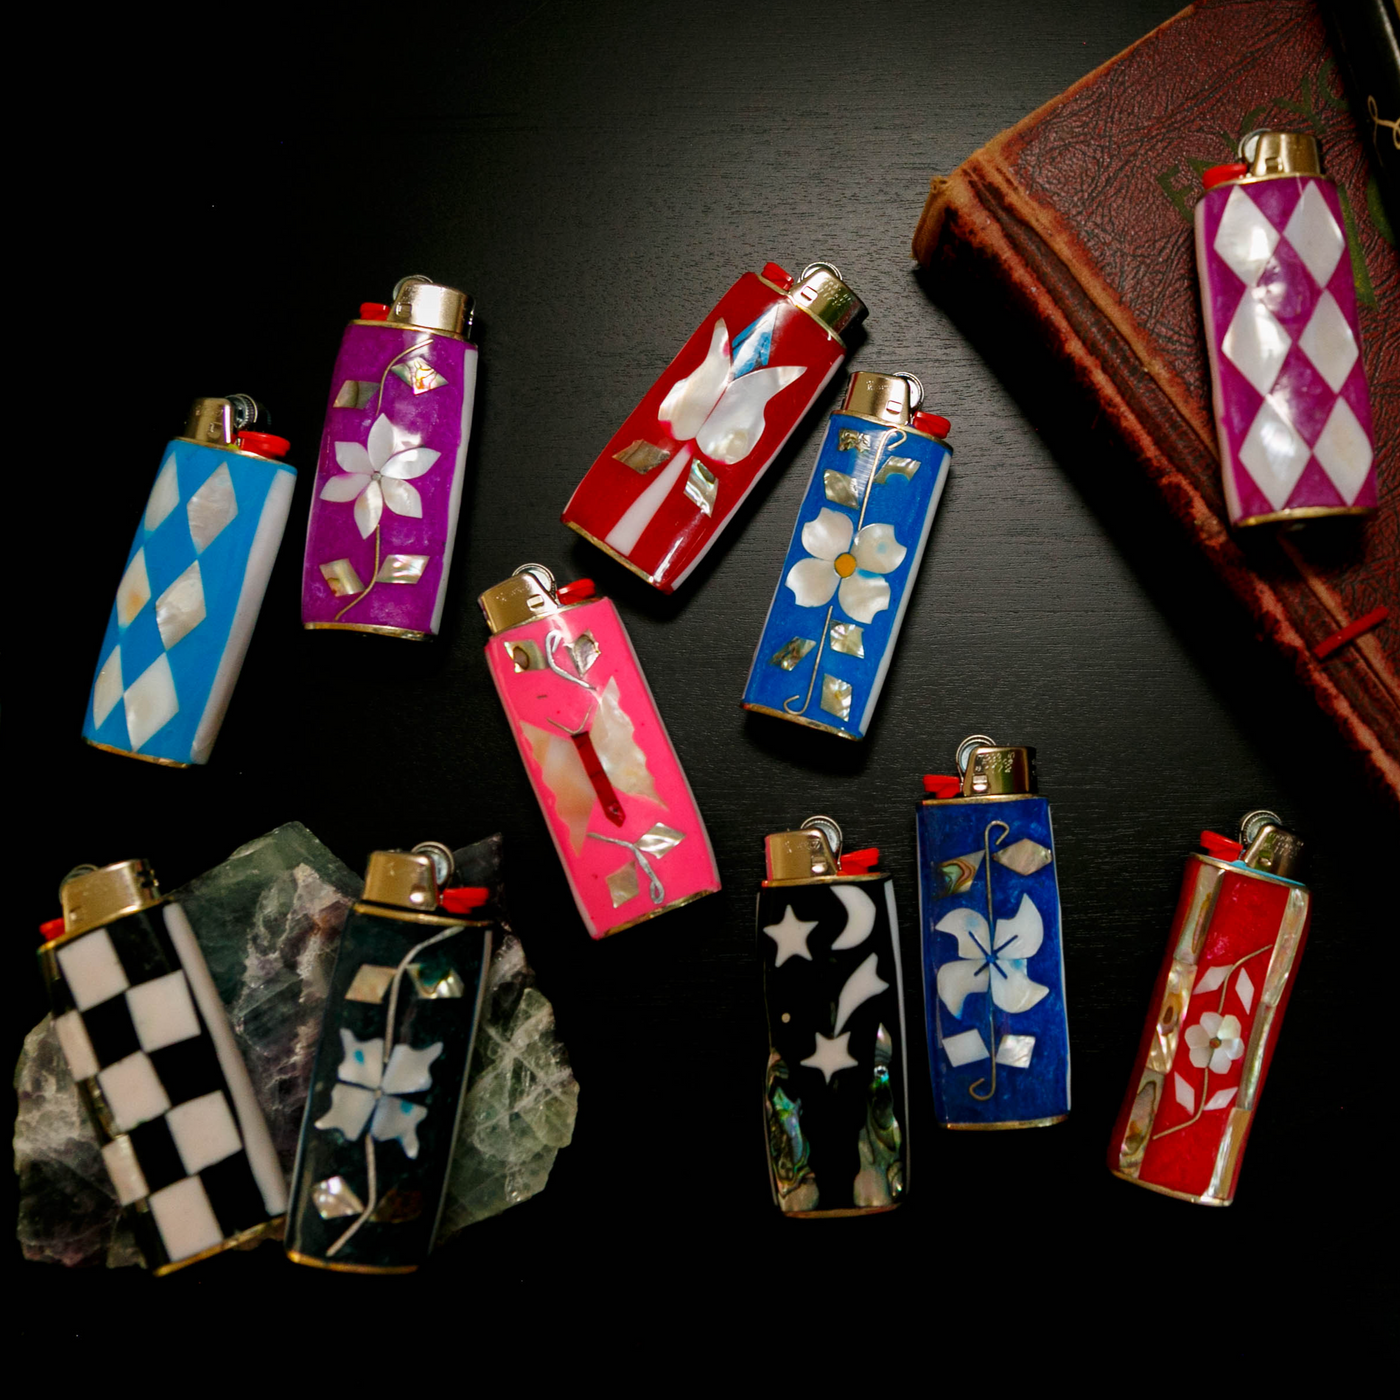 Assortment of Vintage Lighter Covers from Saint Claude Social Club Vintage collection.